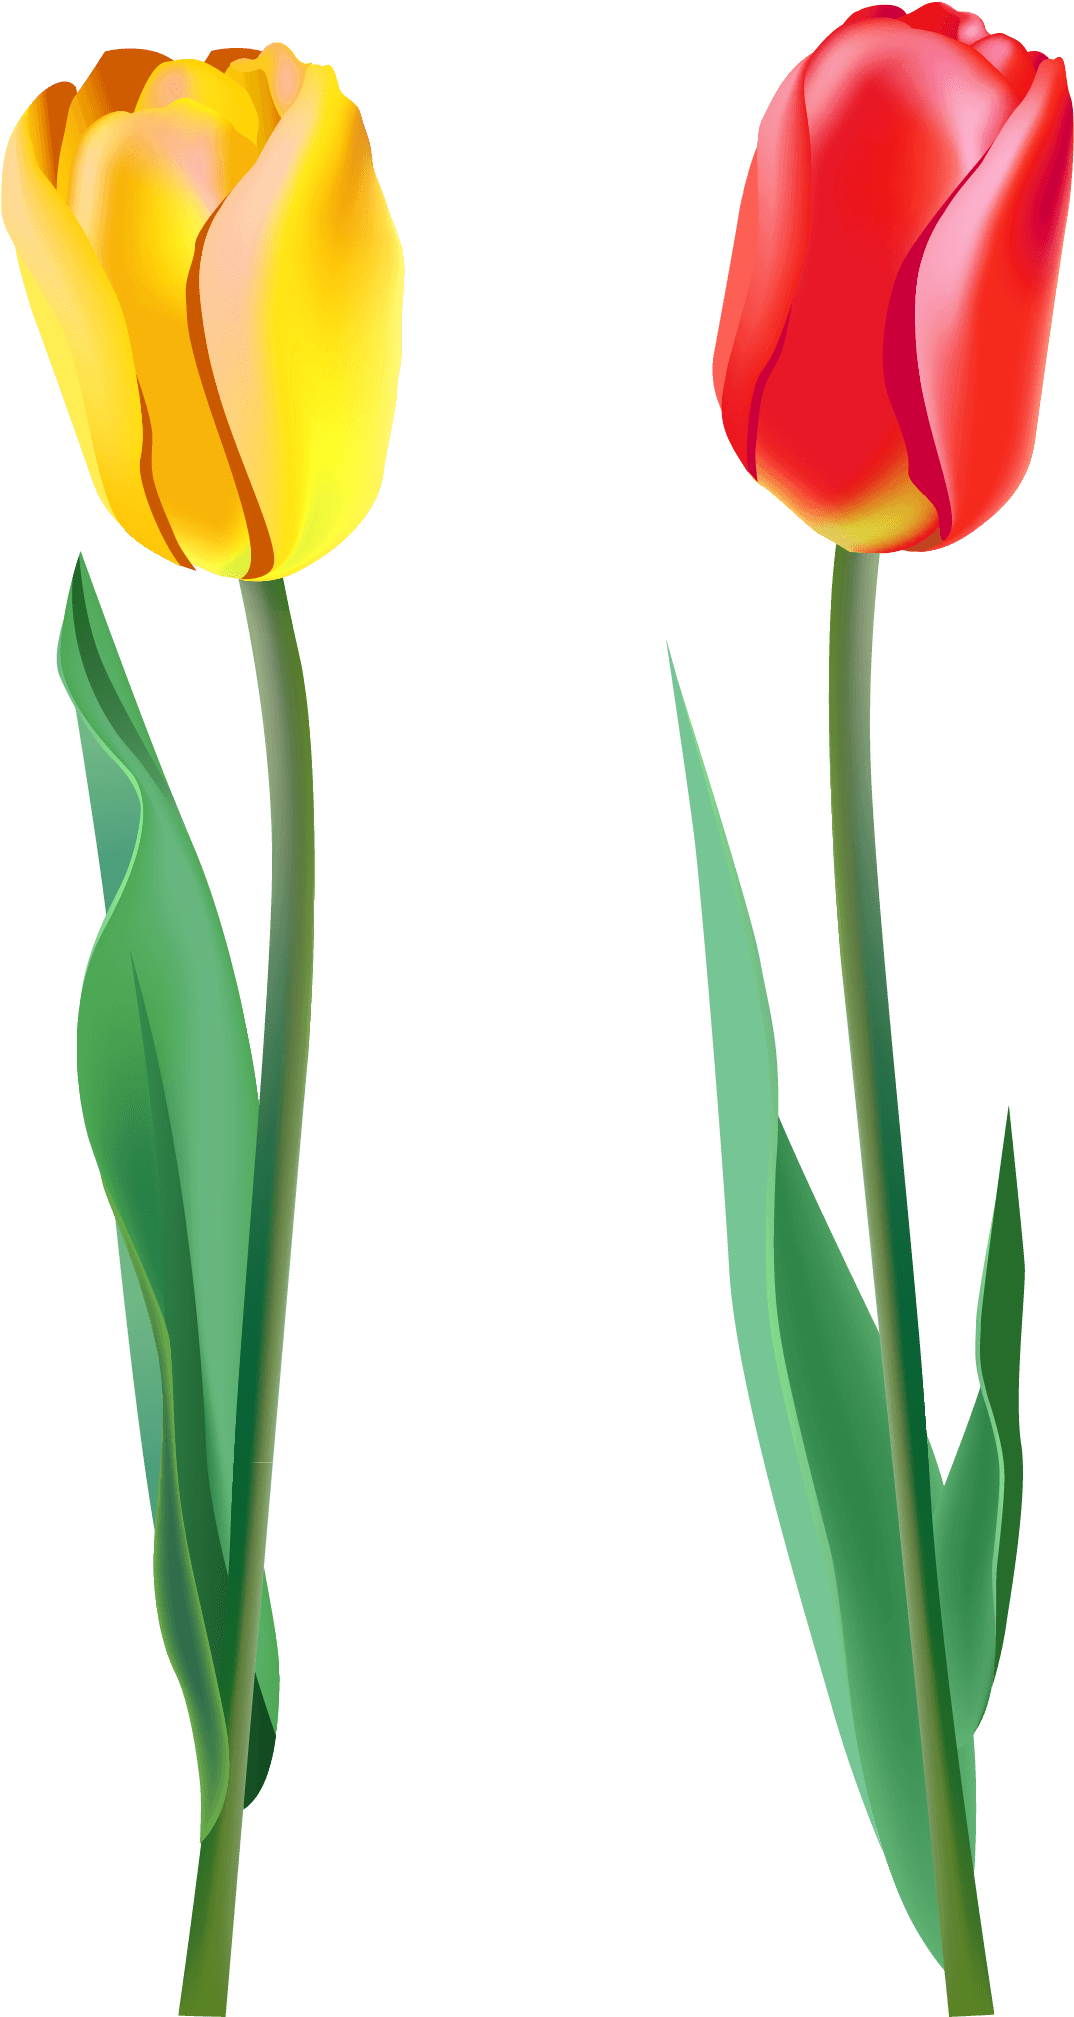 Download PNG image - Red Tulip PNG Image 